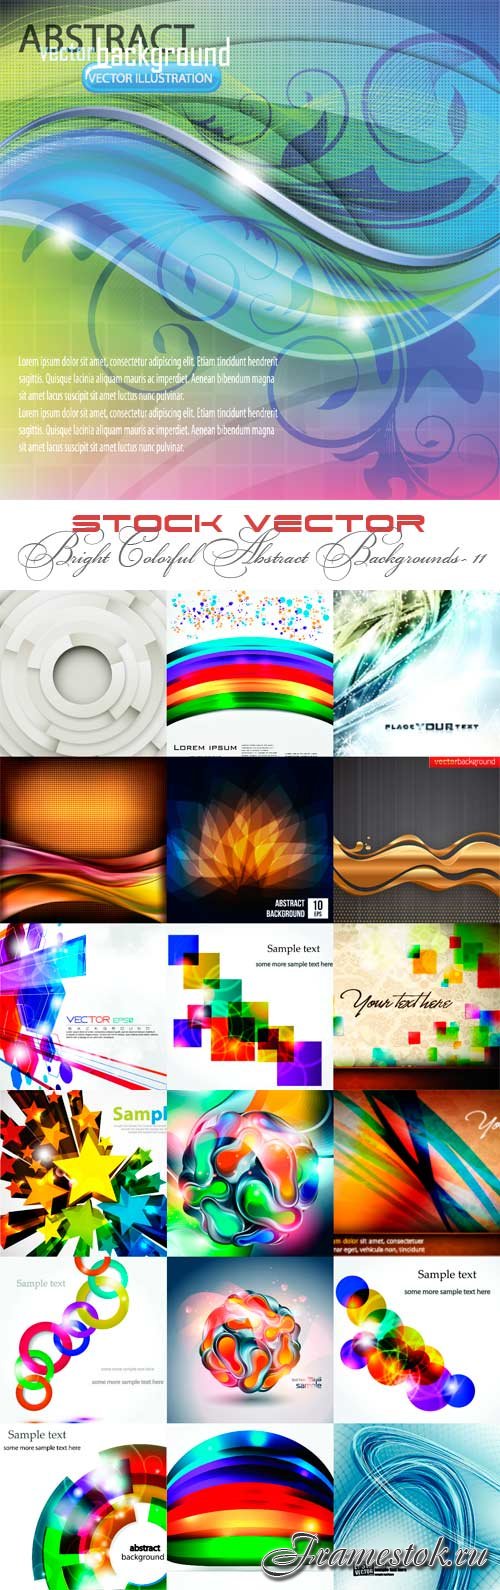 Bright colorful abstract backgrounds vector - 11